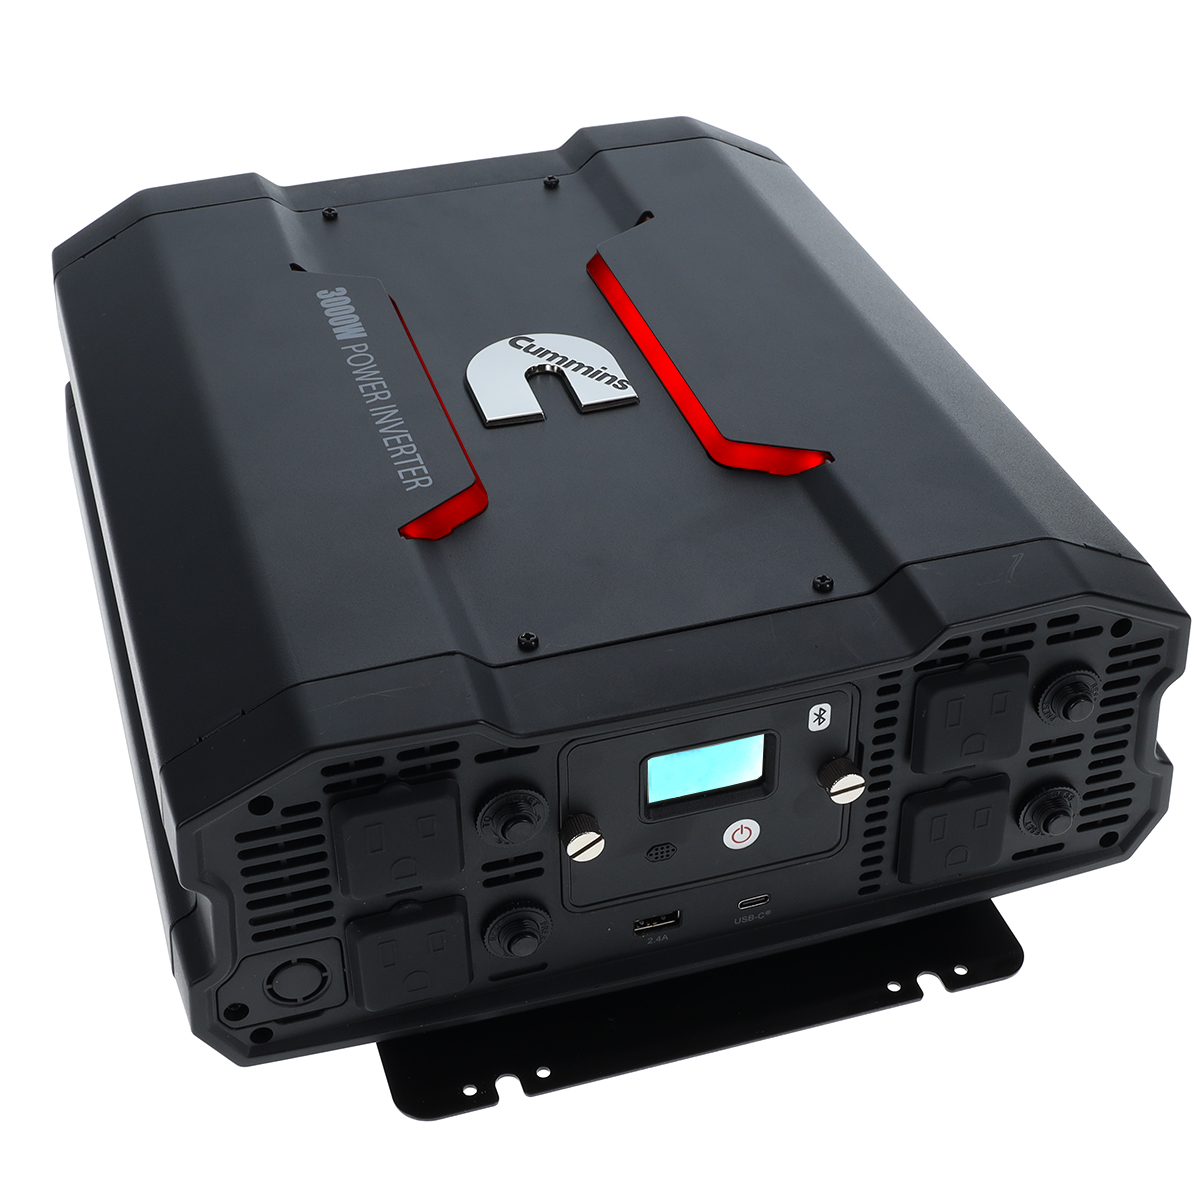 Cummins 3000 Watt Power Inverter Modified Sine Wave Truck Inverter 12V to 110 Volts Four AC Outlets Two USB Ports (Full Cable Ki